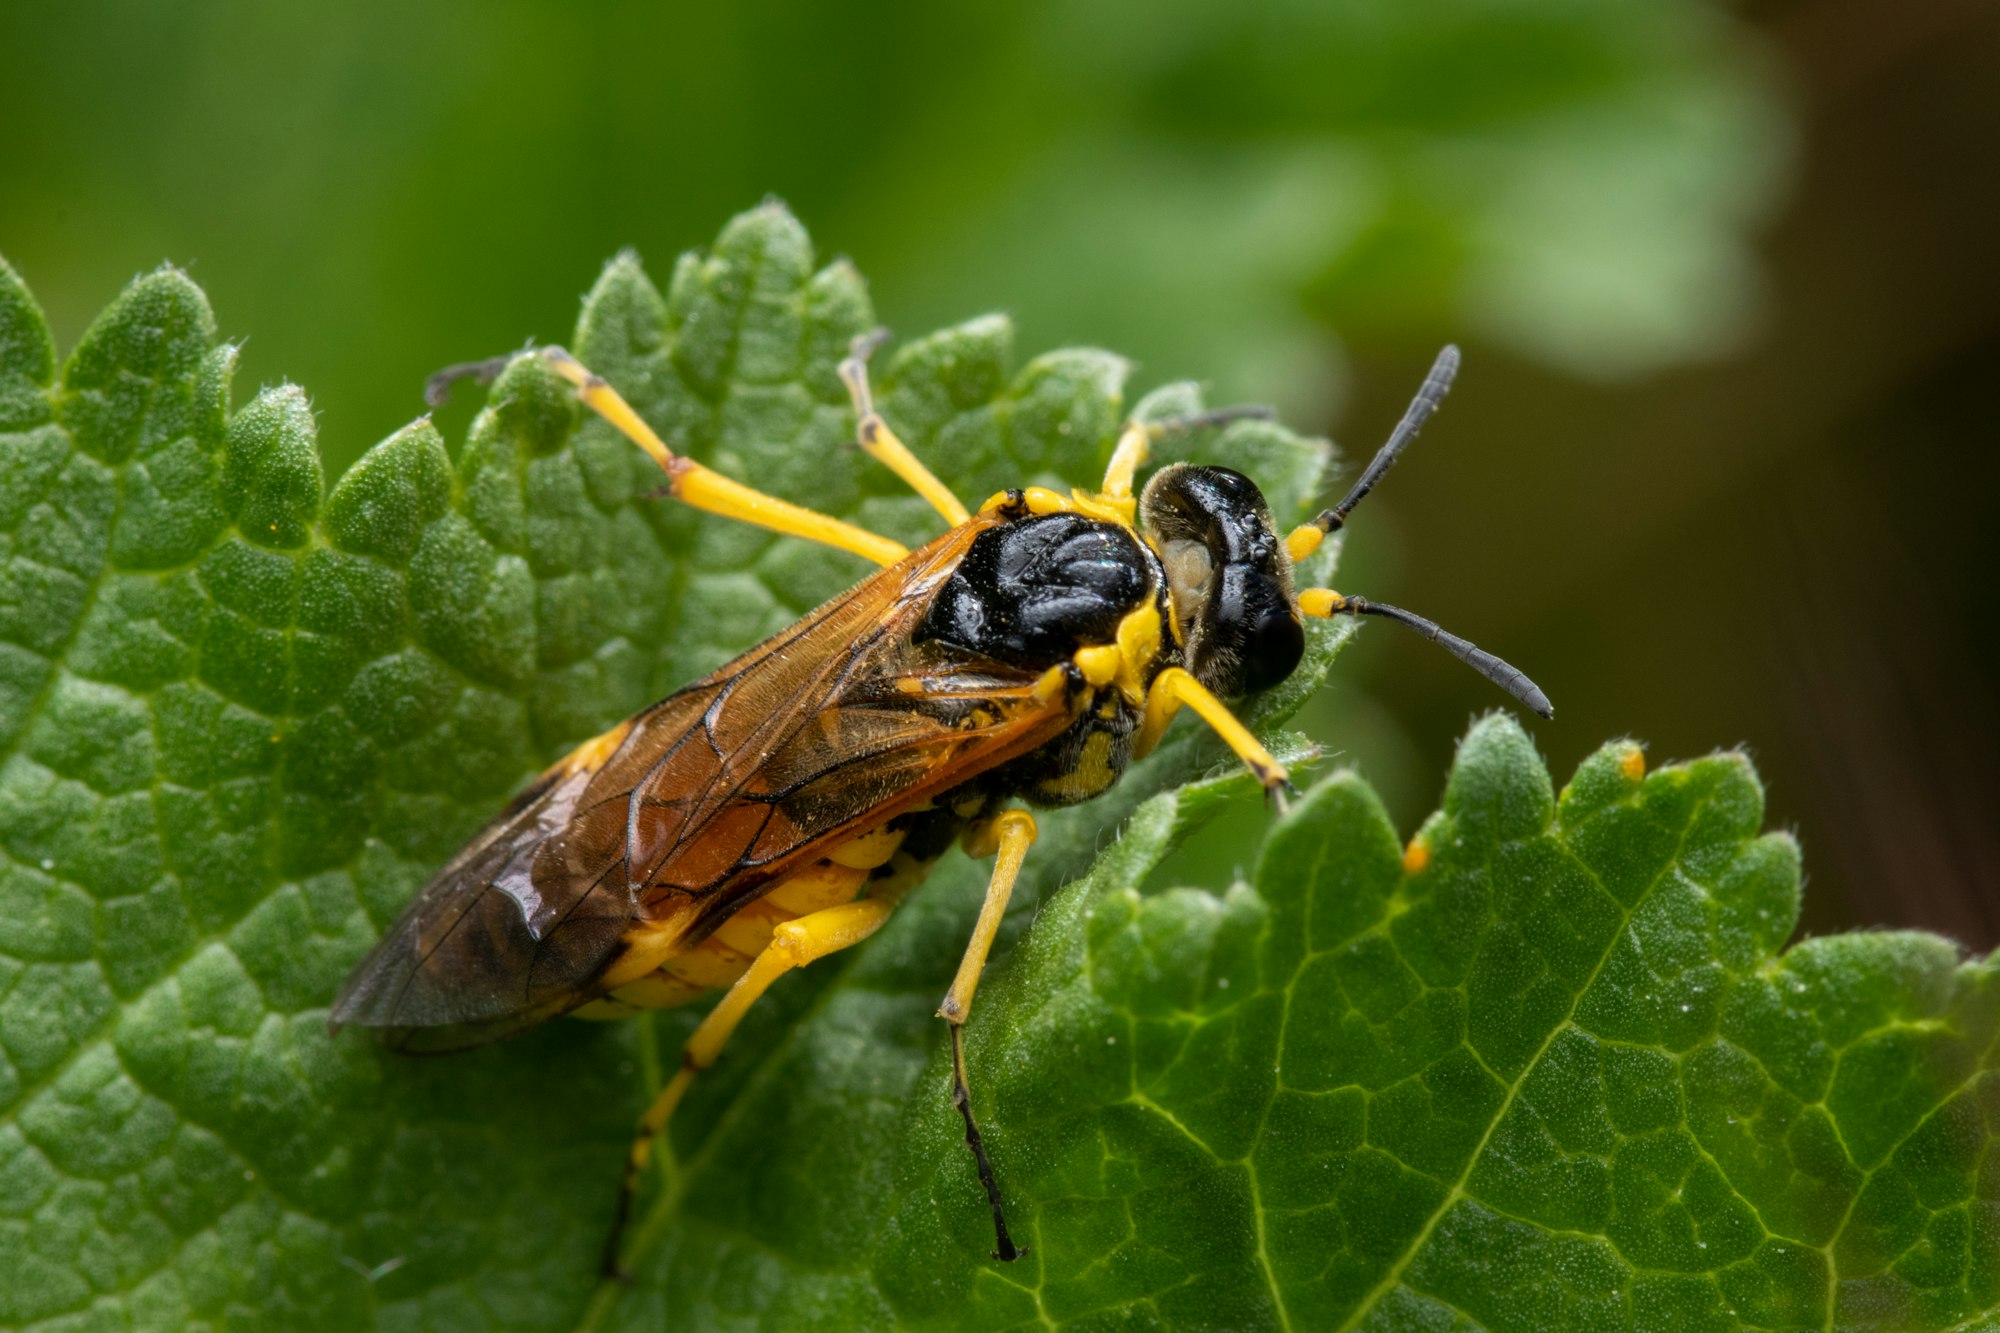 Closeup of a yellowjacket wasp on green leaves in a garden